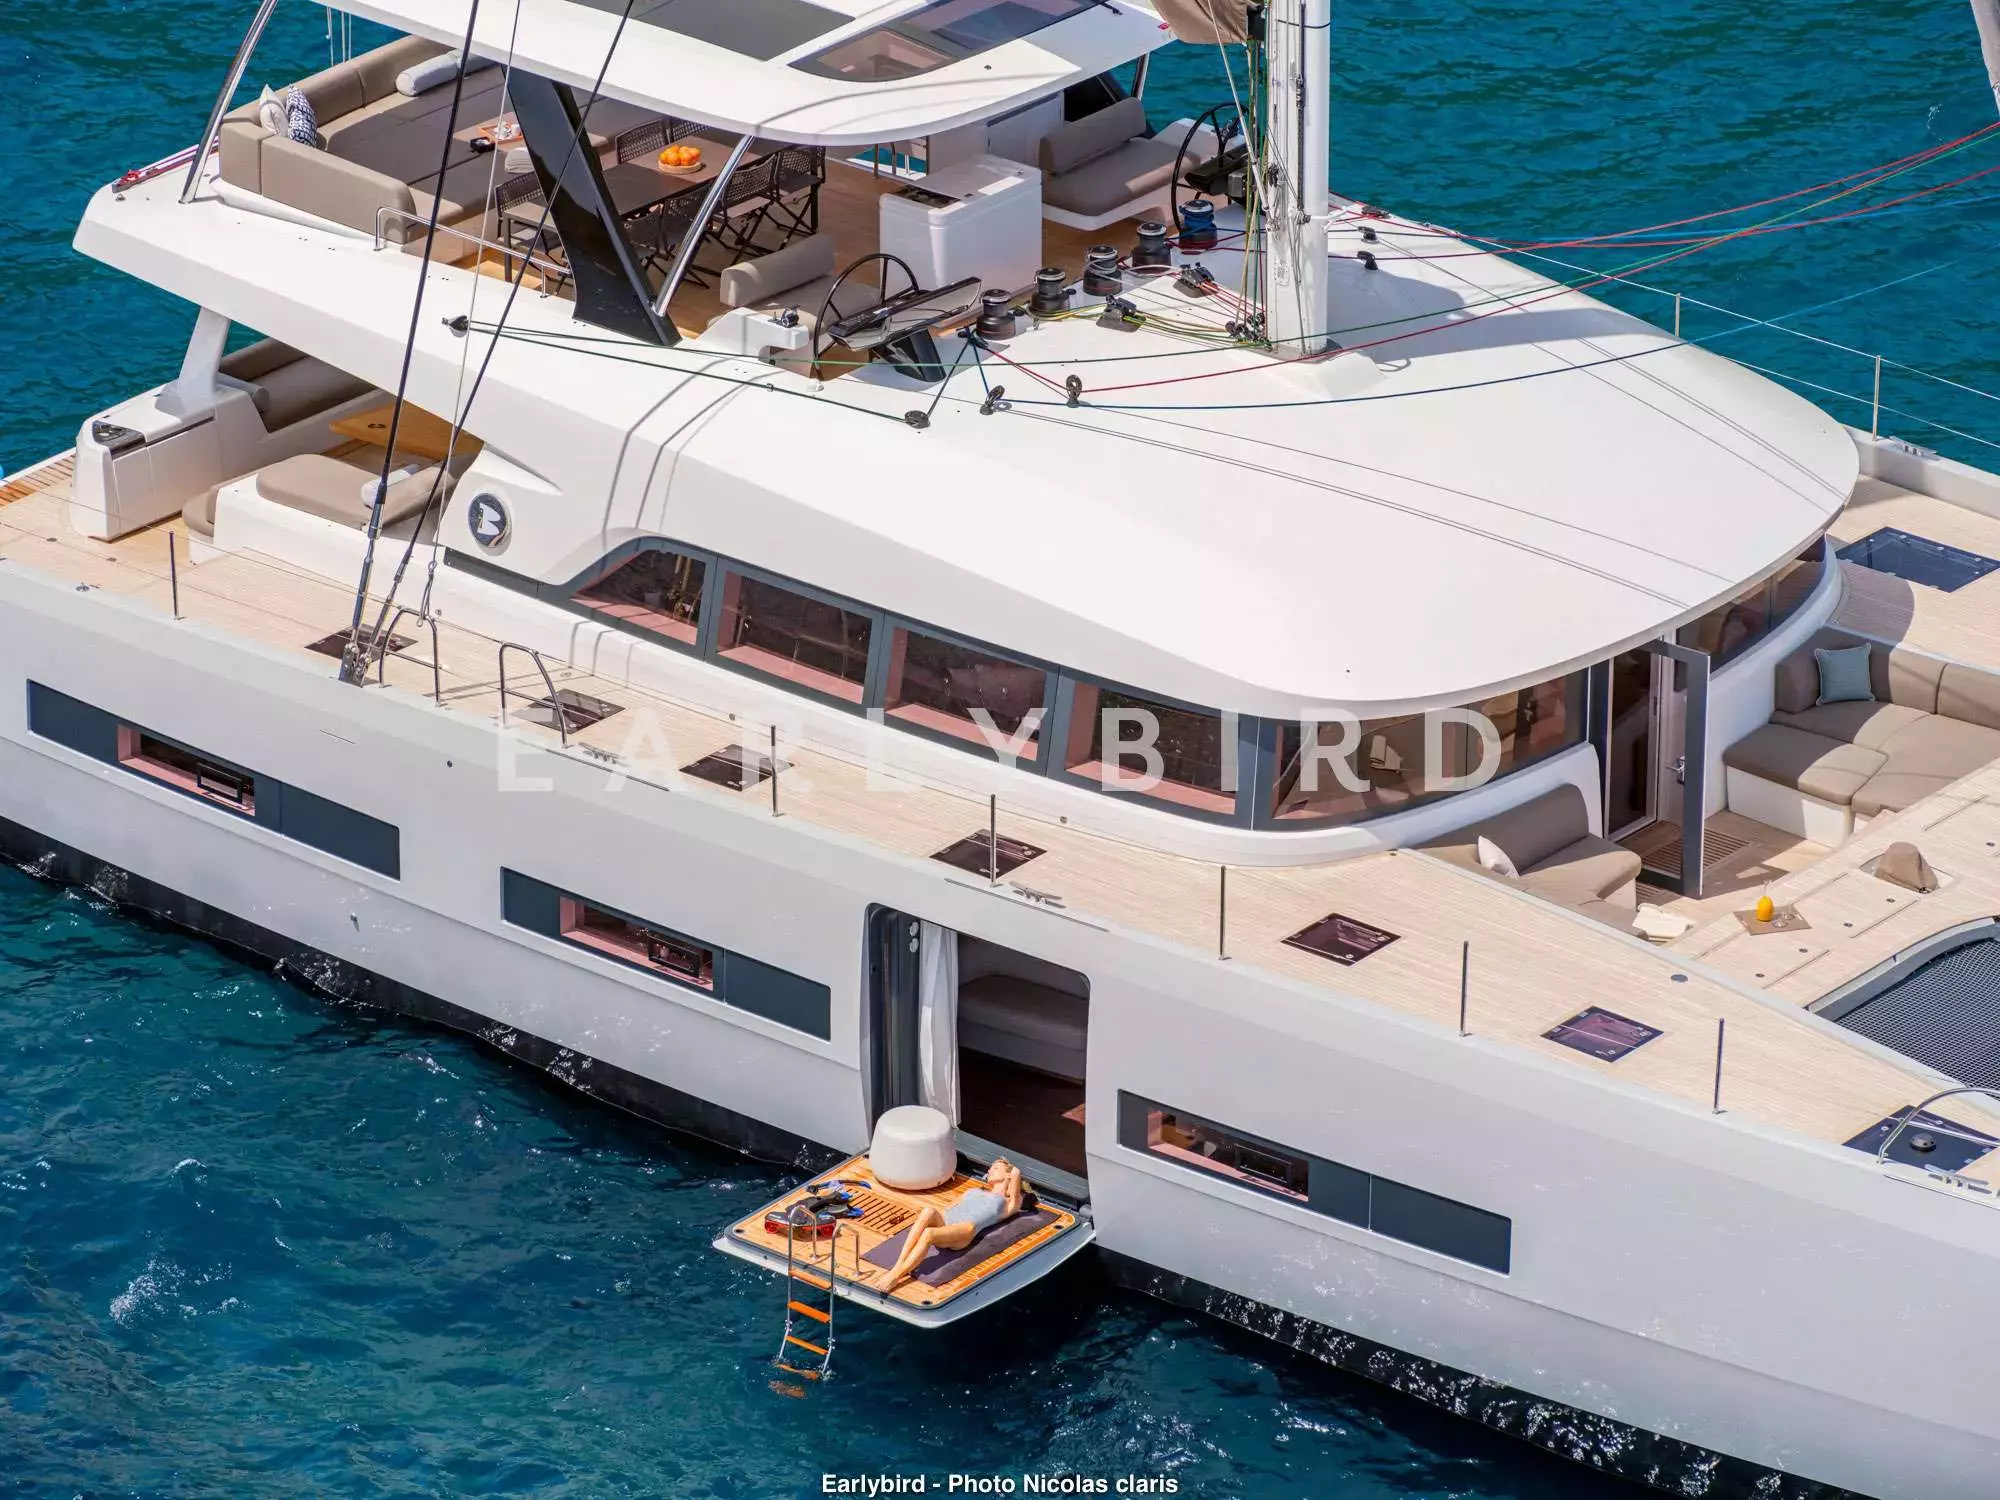 Earlybird by Lagoon - Special Offer for a private Luxury Catamaran Charter in Sardinia with a crew